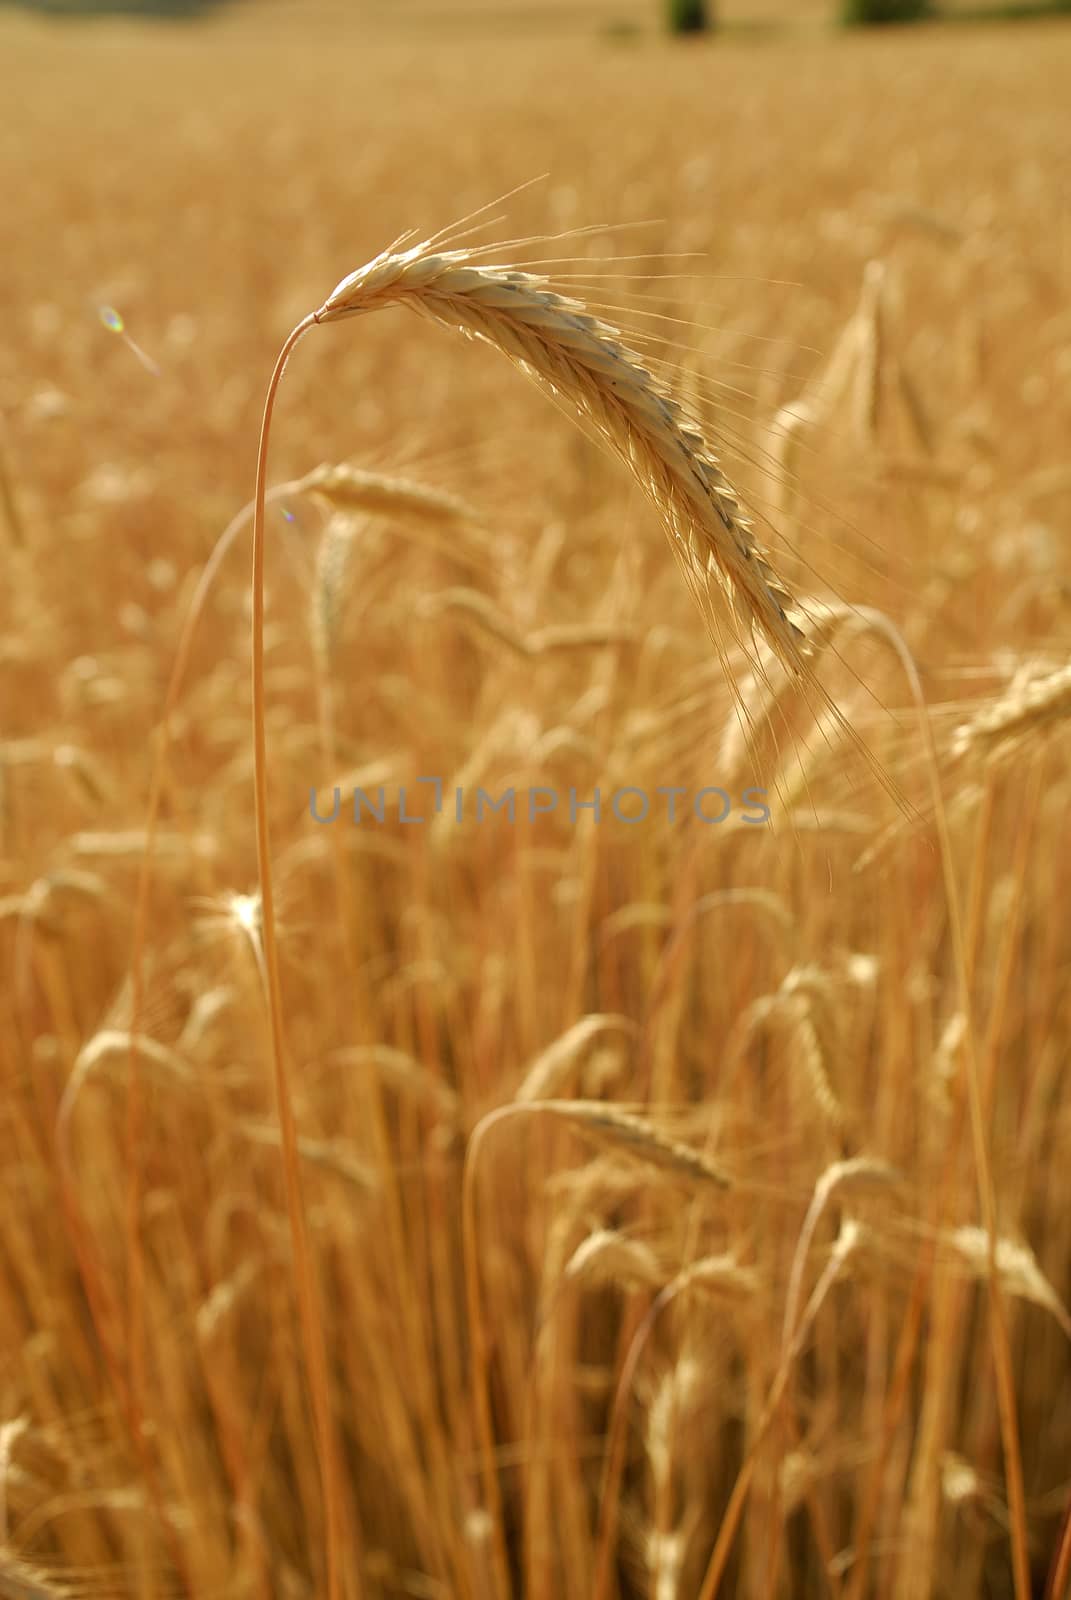 Secale cereal, Rye, Allergens Plants by jalonsohu@gmail.com